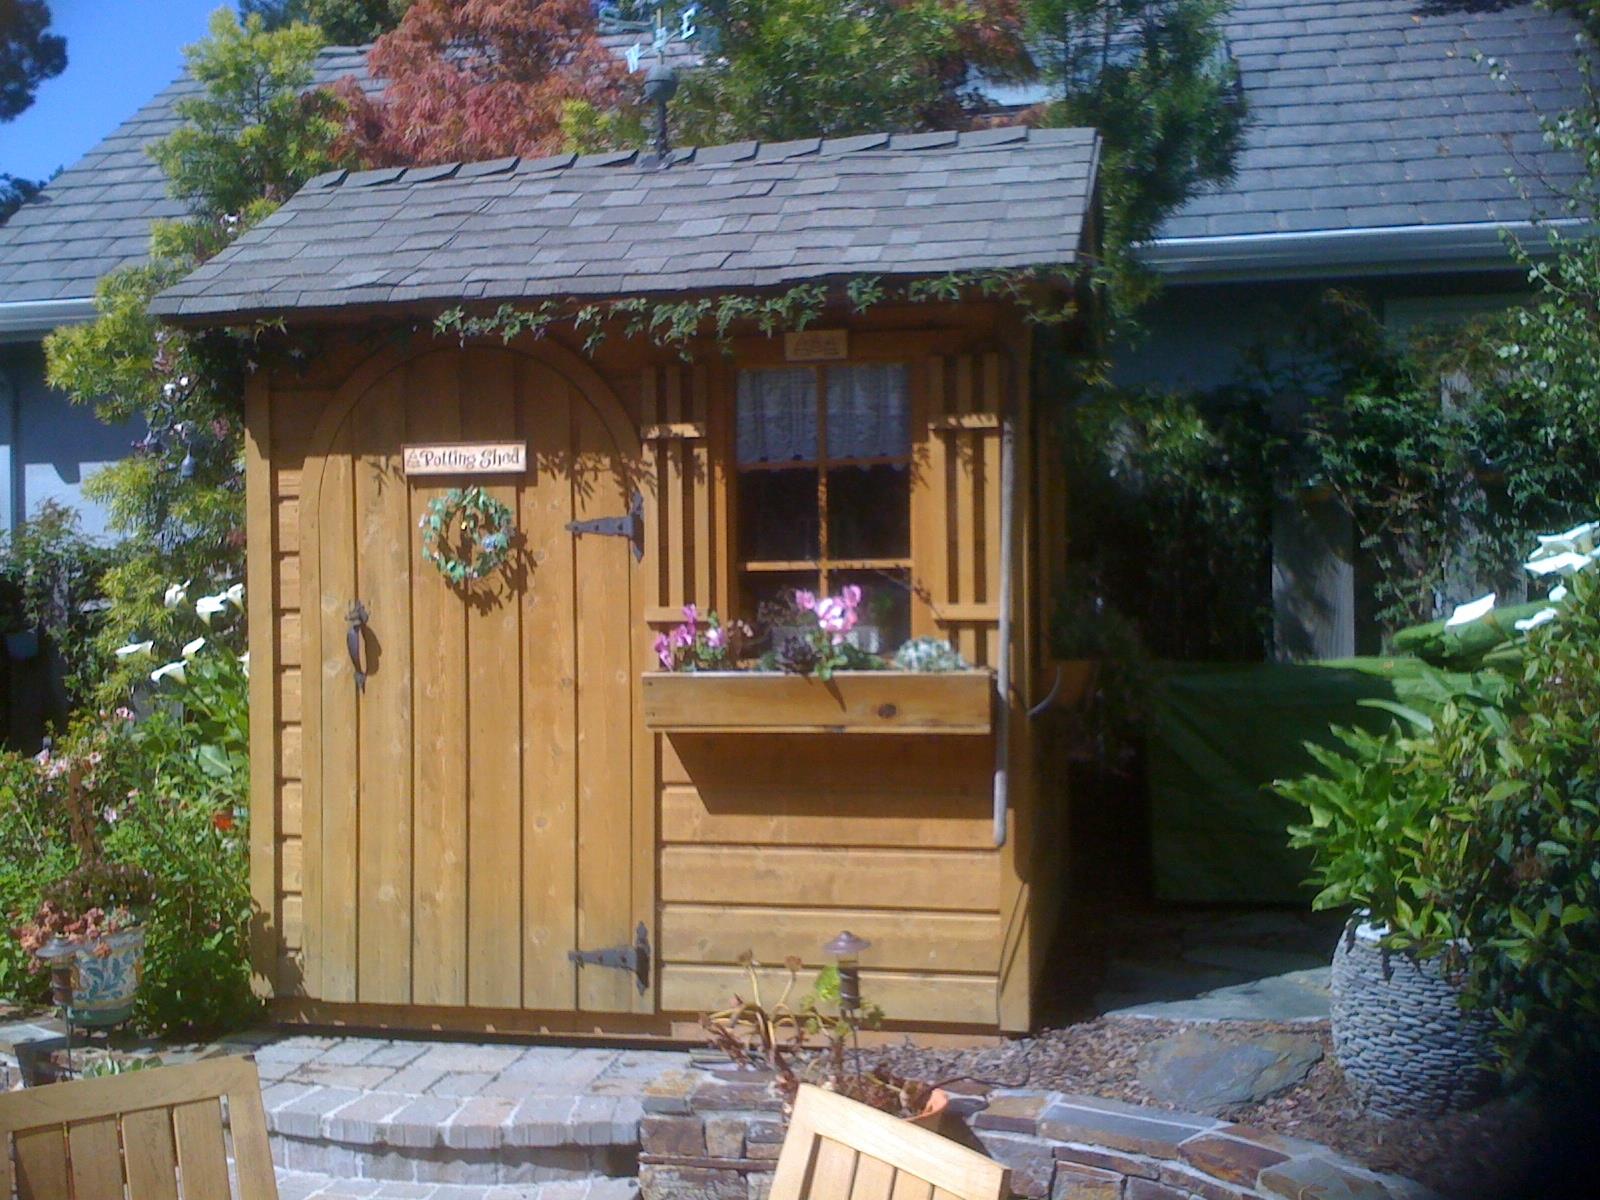 palmerston shed kit 5x7 with antique flower boxes in Carmel California. ID number 103027-2